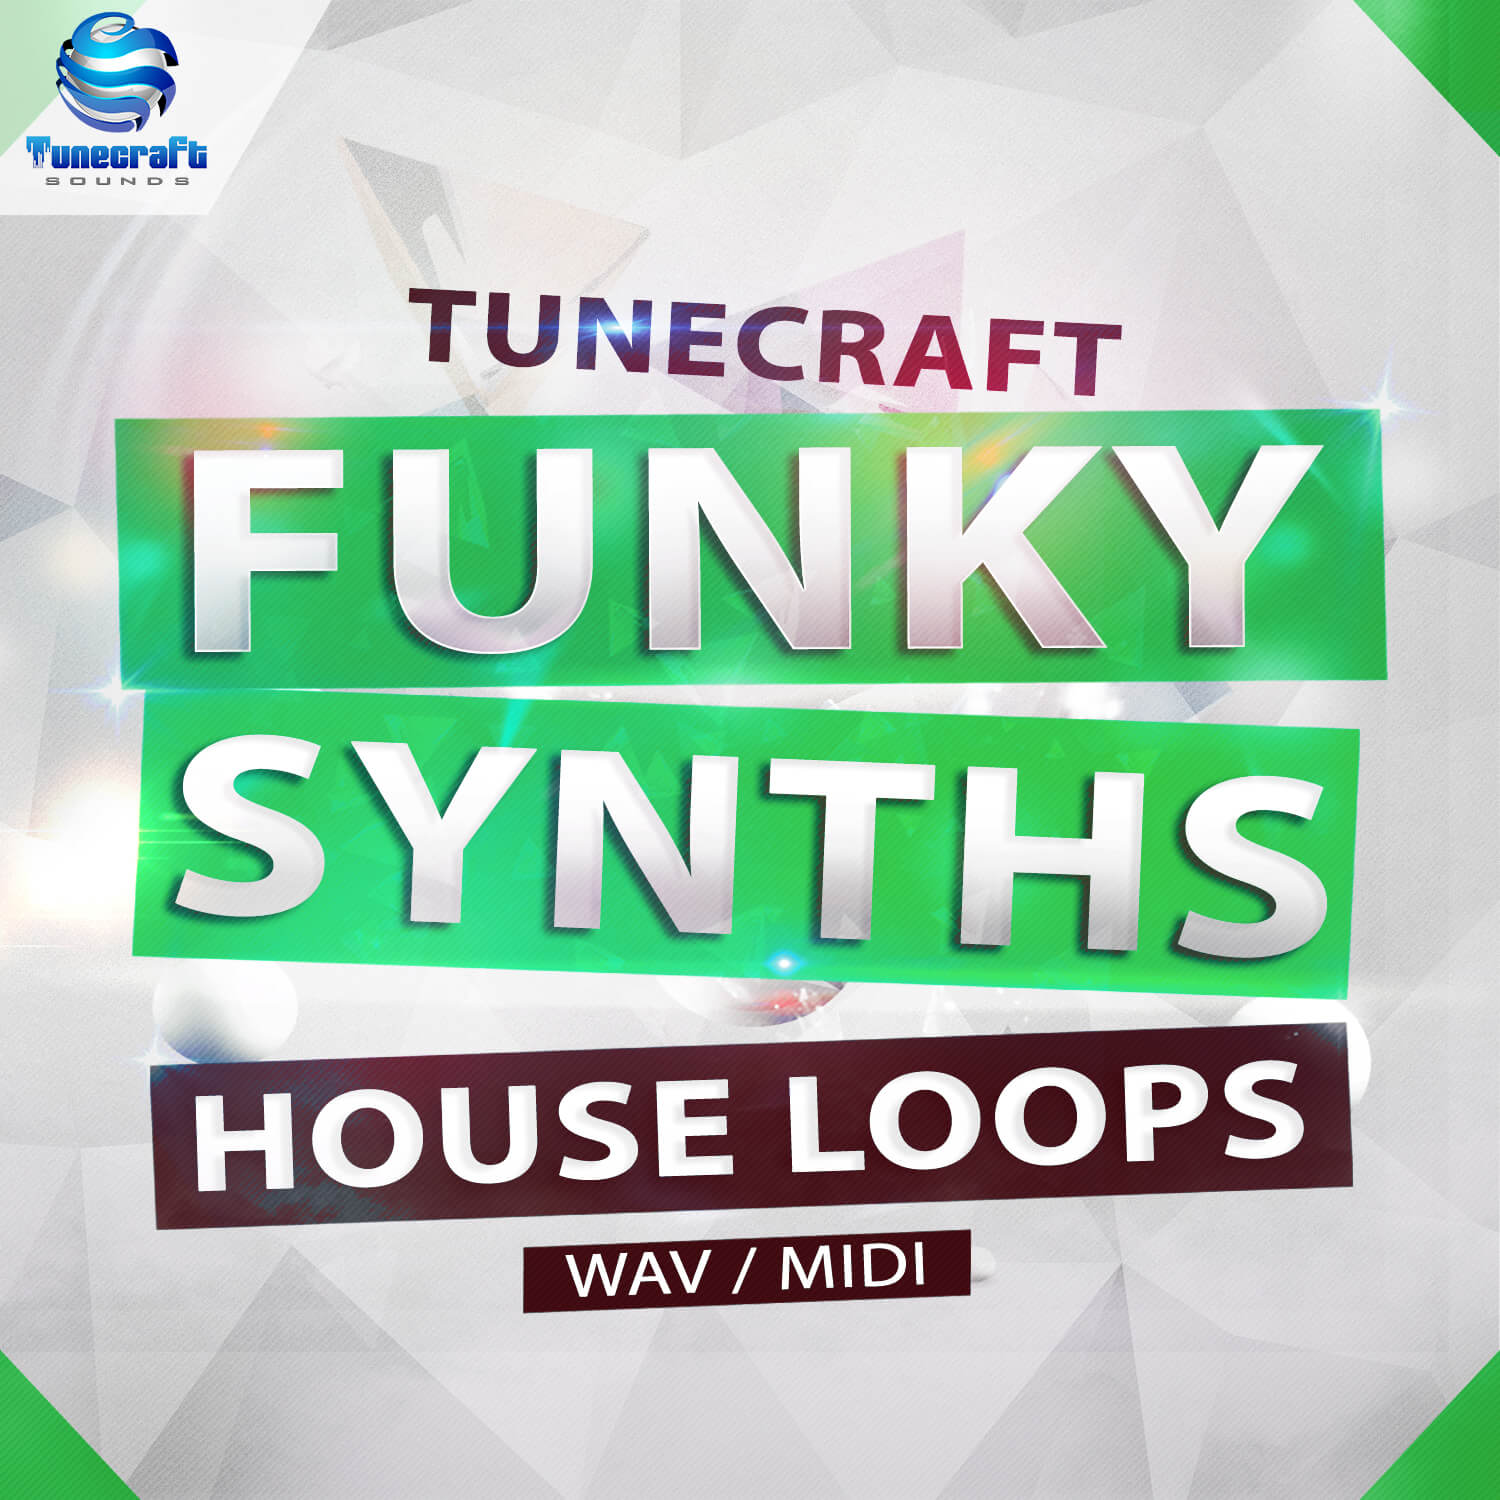 Tunecraft Funky Synths House Loops